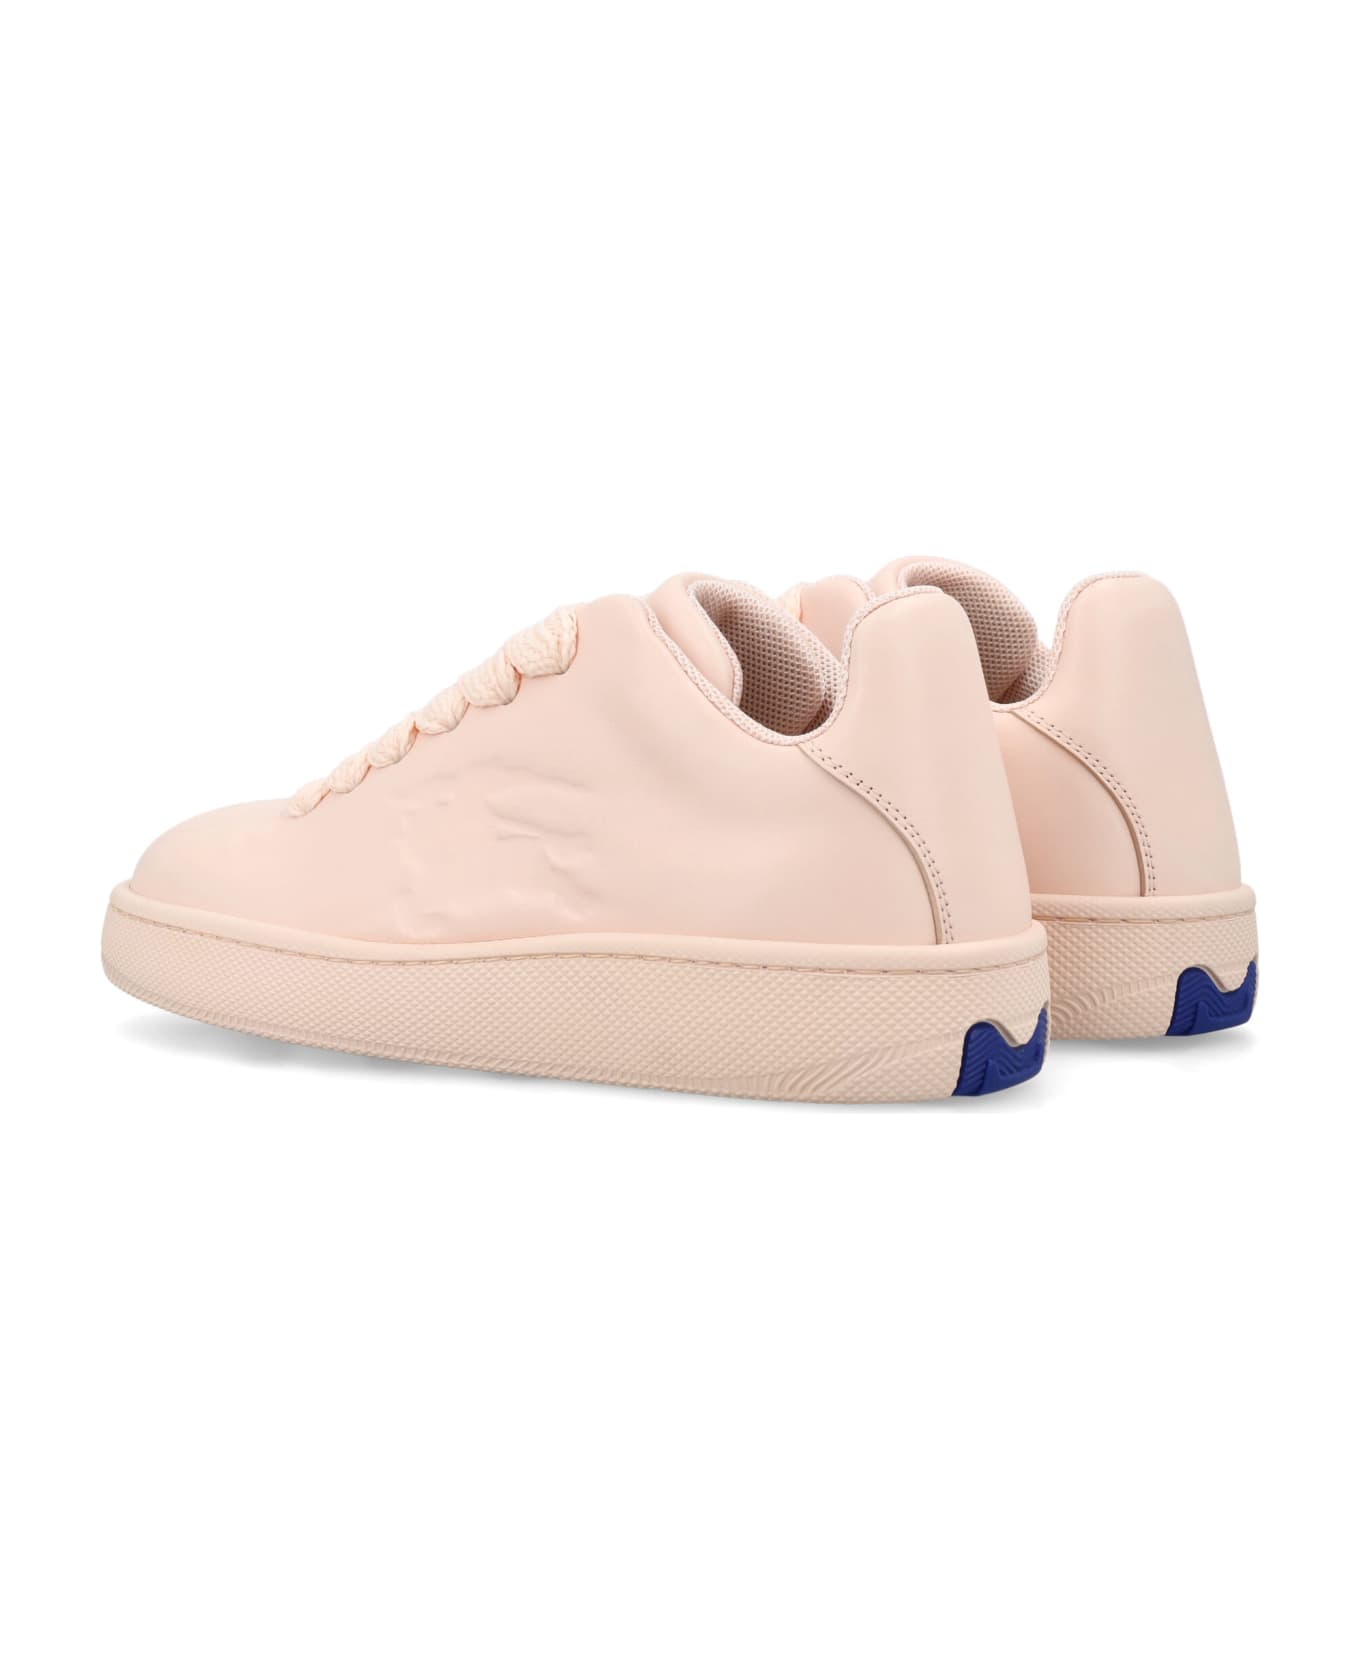 Burberry London Leather Box Sneakers - BABY NEON